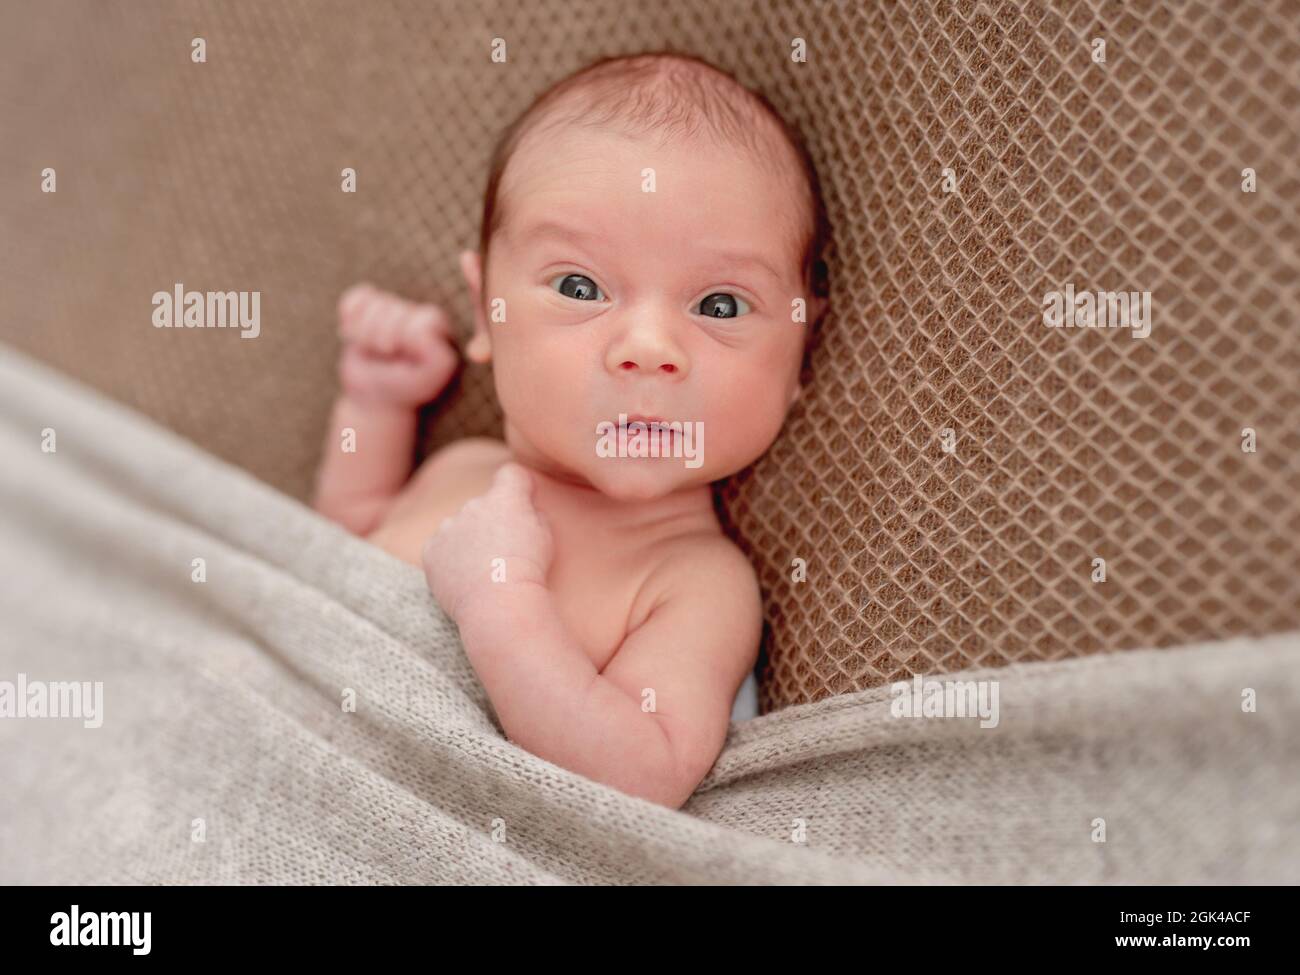 Cute sleepless newborn in funny hat looking to side Stock Photo